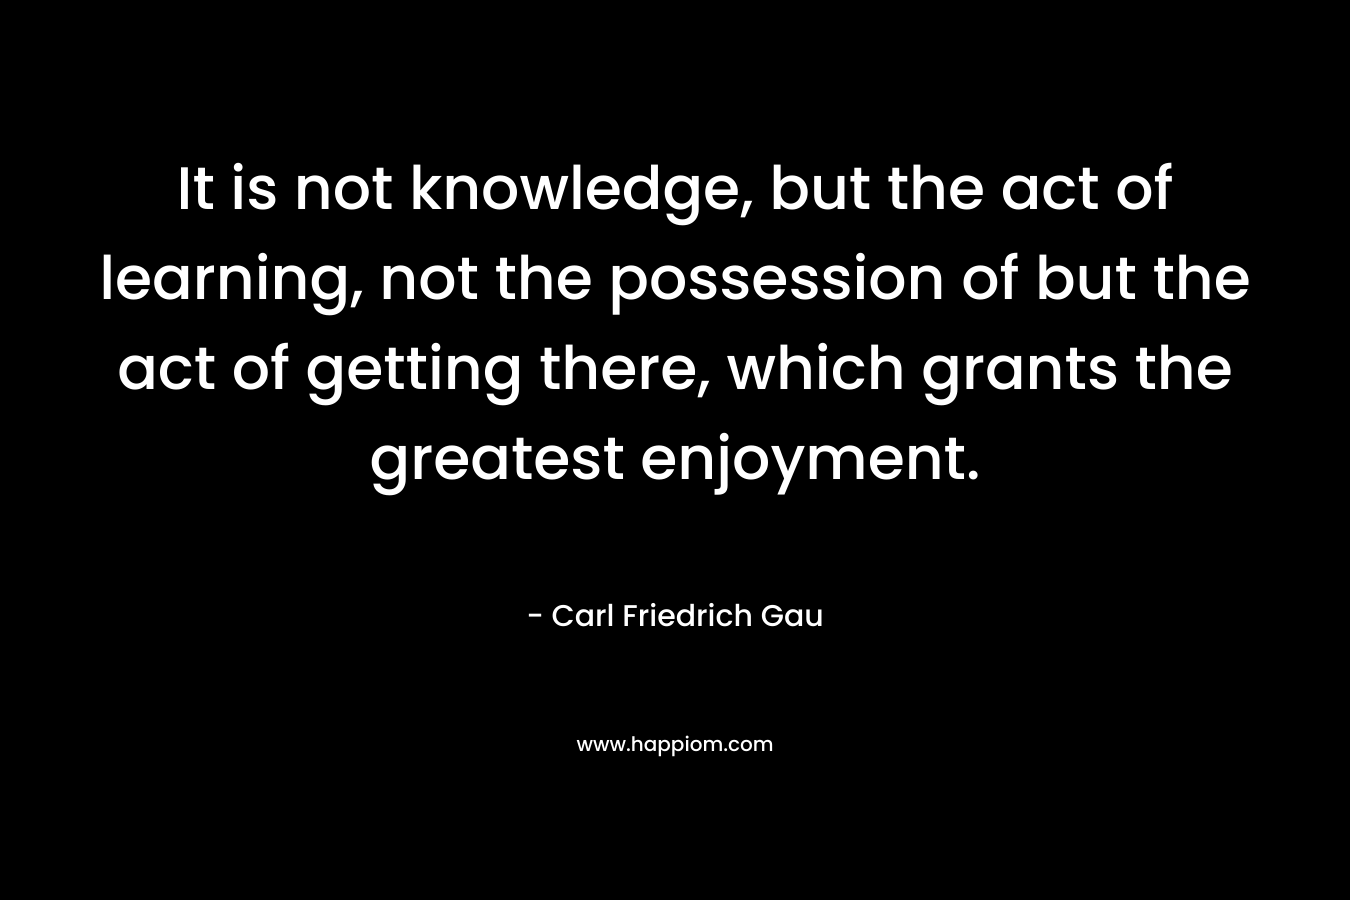 It is not knowledge, but the act of learning, not the possession of but the act of getting there, which grants the greatest enjoyment. – Carl Friedrich Gau